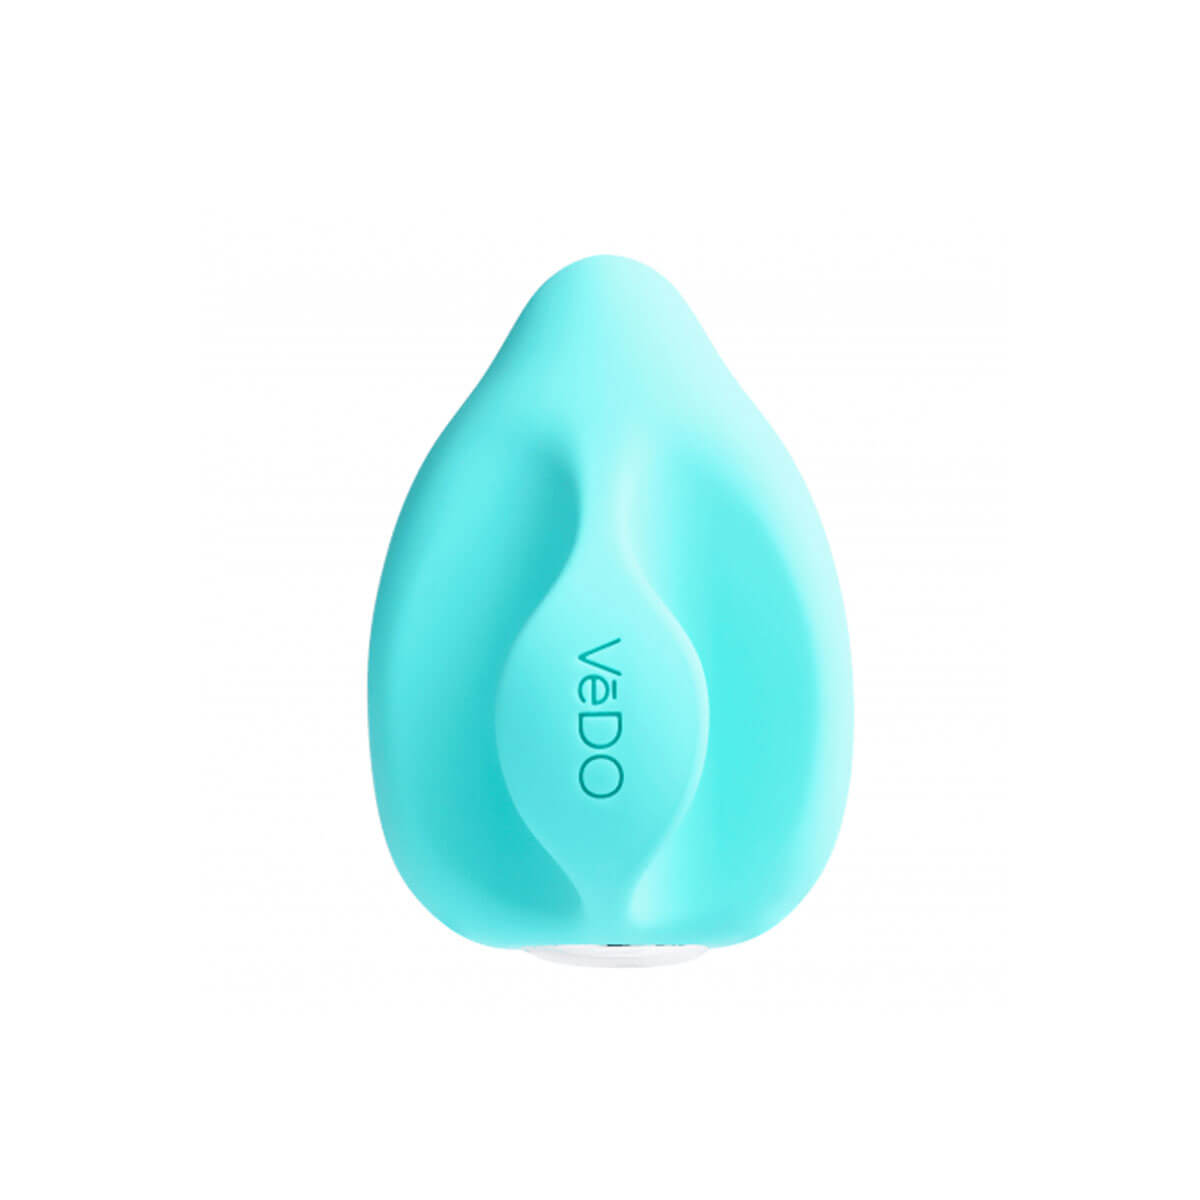 Turquoise silky-smooth silicone finger vibrator with a handle for easy grip Nudie Co